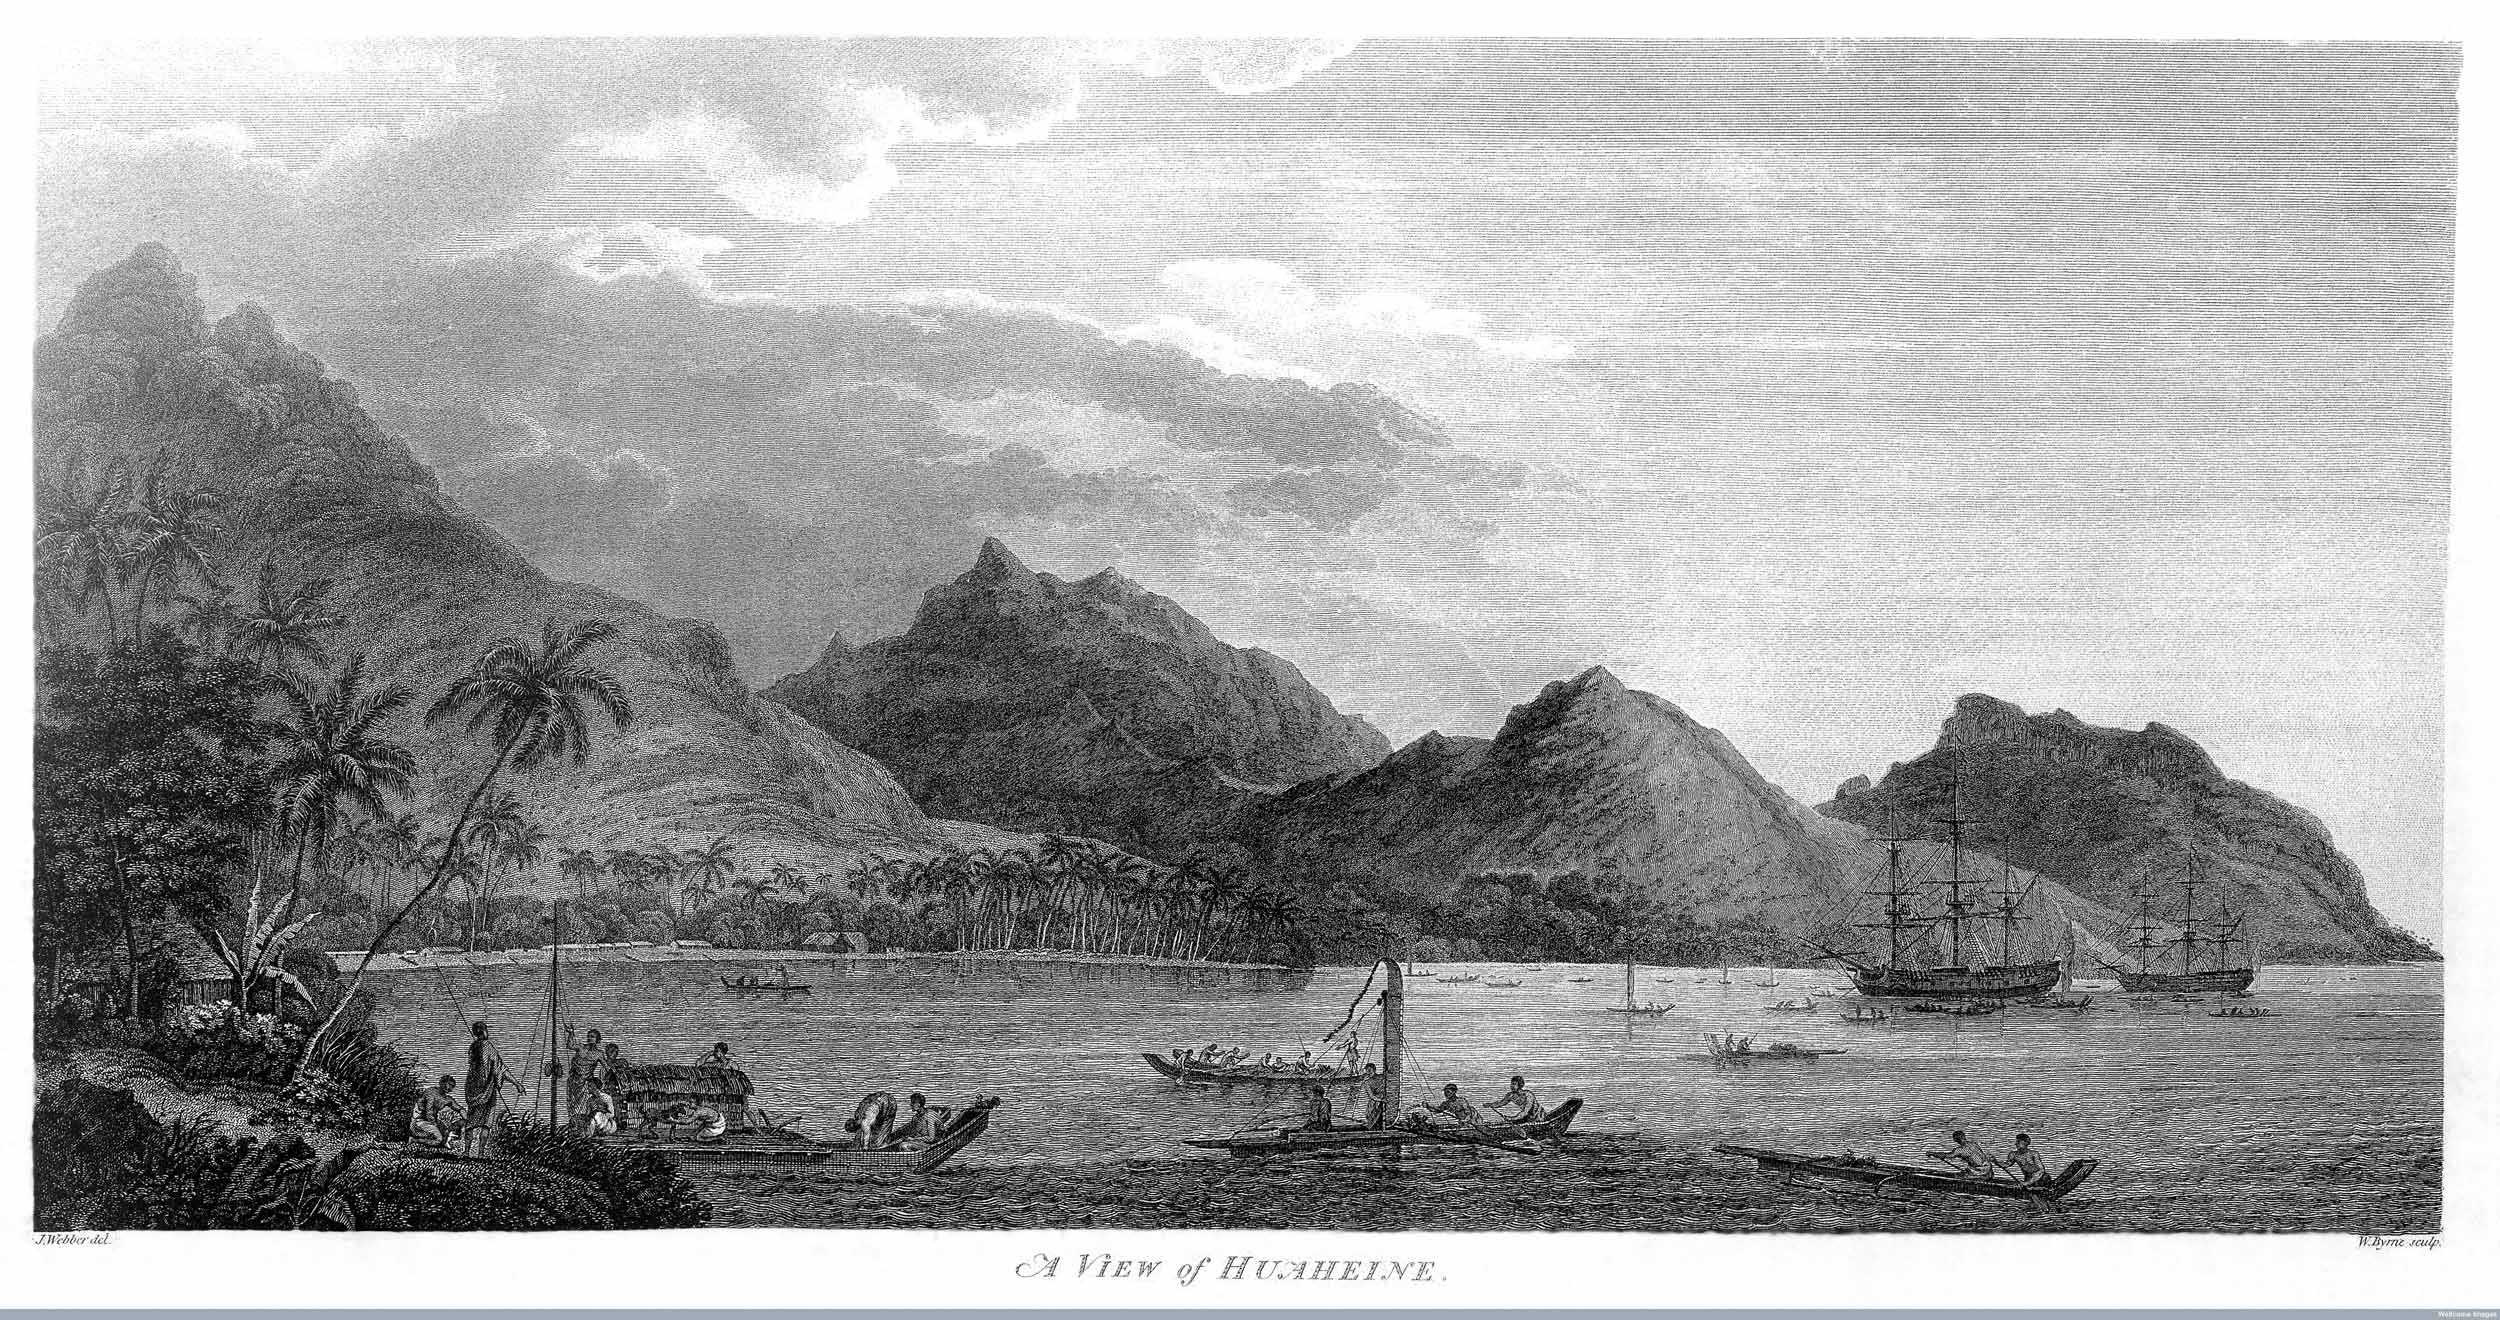 View of Huaheine (from James Cook's Voyages).  Copyright Wellcome Library, London. Creative Commons Attribution 4.0 International (https://creativecommons.org/licenses/by/4.0/).